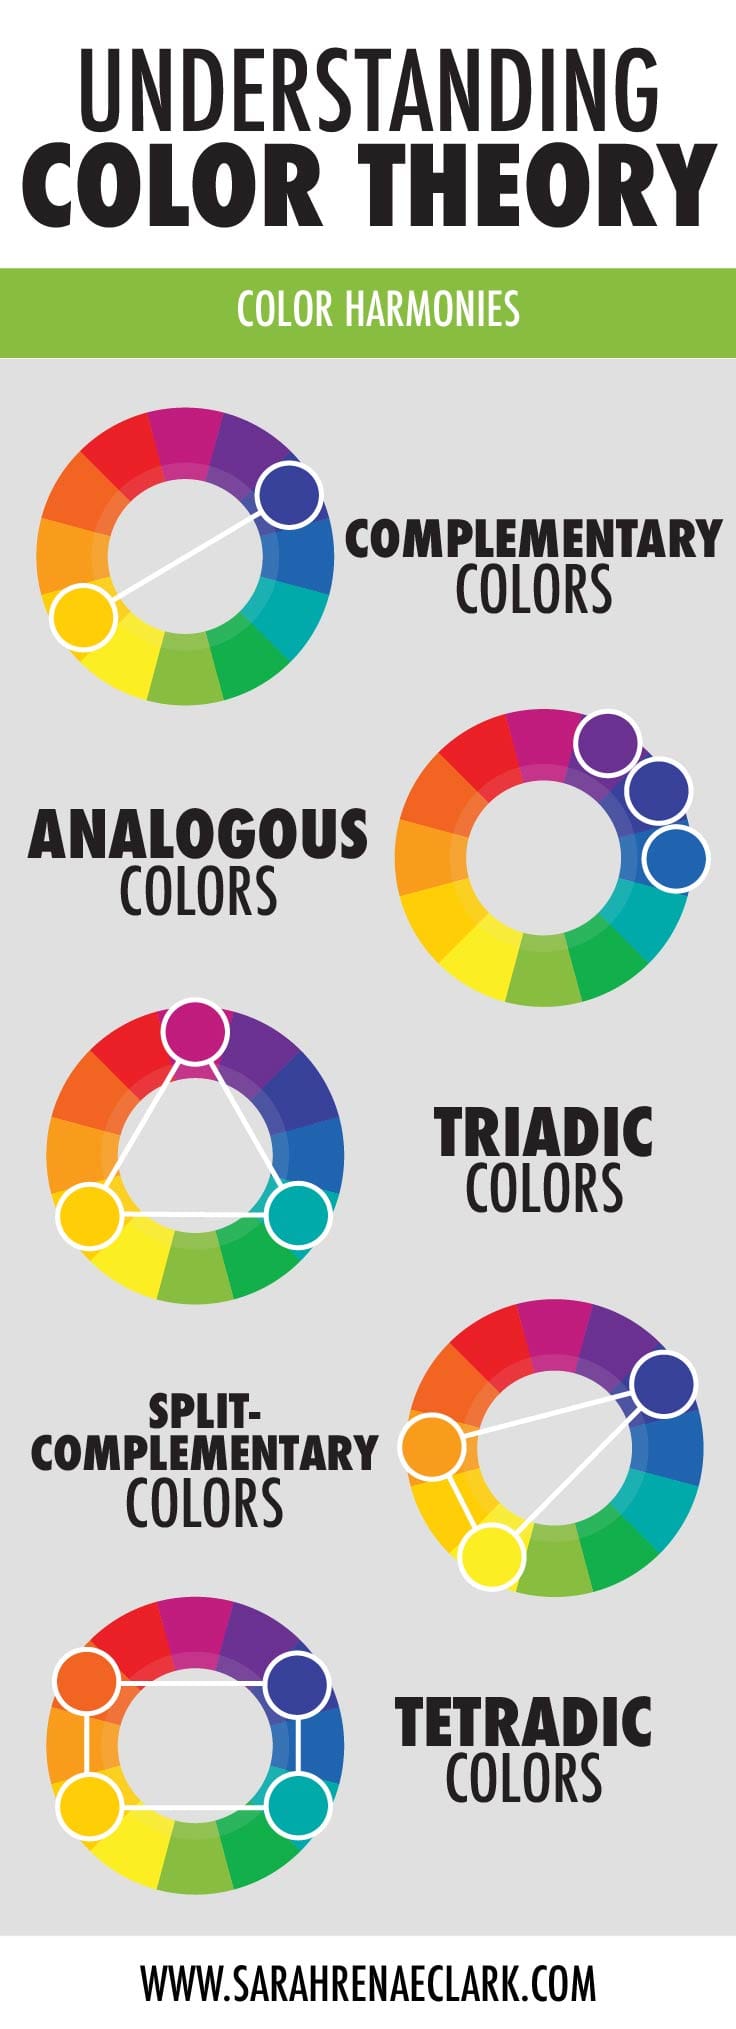 Colour Theory, Properties and Harmonies - Part 1: Choosing the